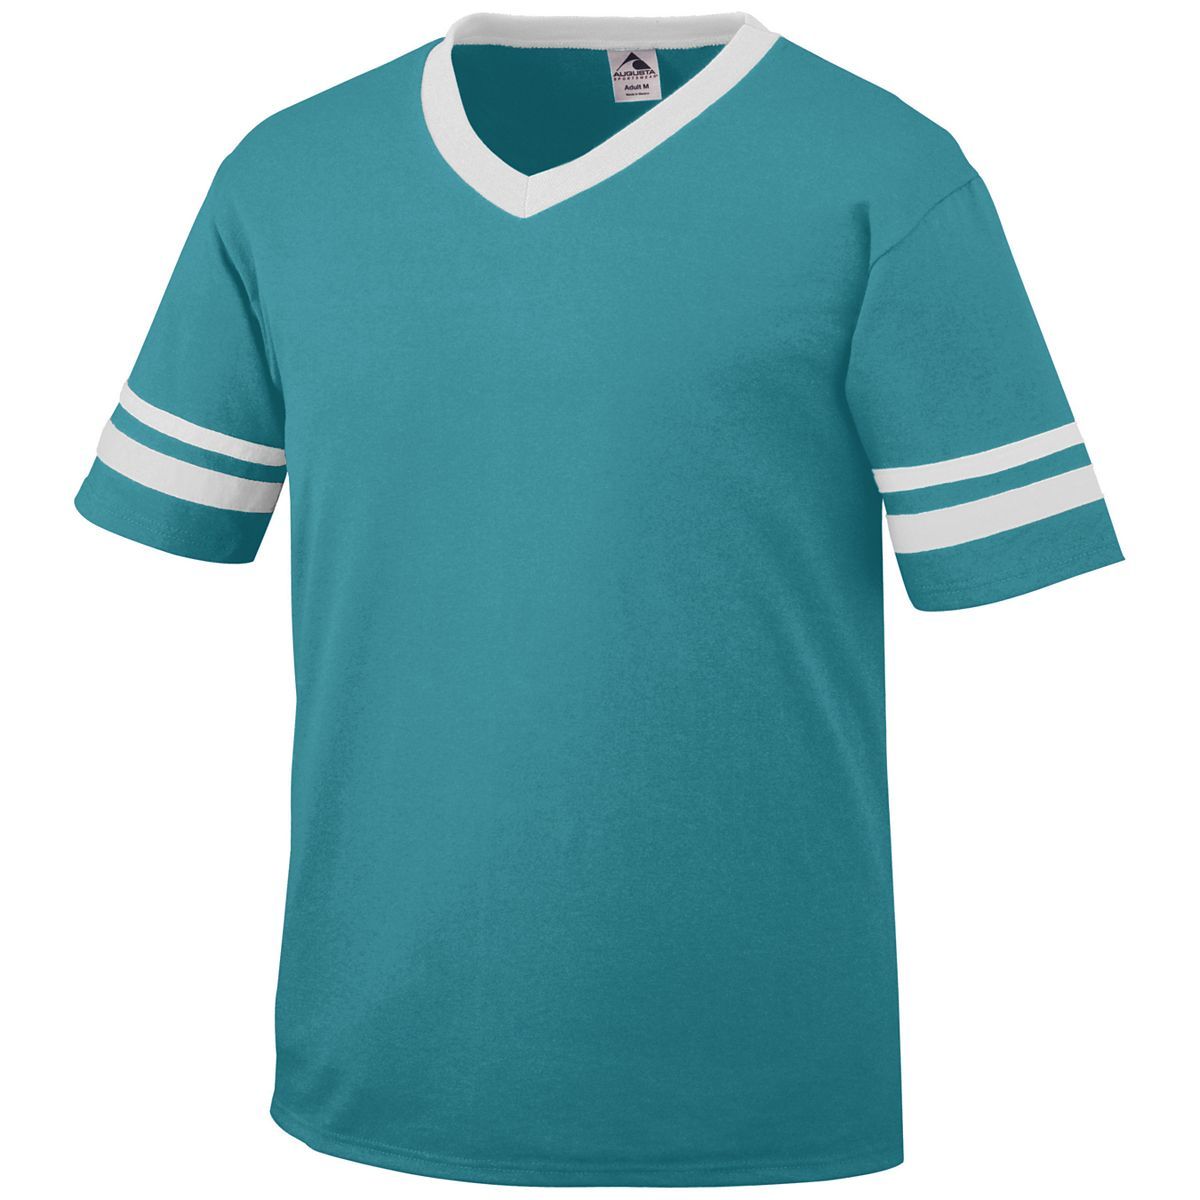 Augusta Sportswear Youth Sleeve Stripe Jersey in Teal/White  -Part of the Youth, Youth-Jersey, Augusta-Products, Shirts product lines at KanaleyCreations.com